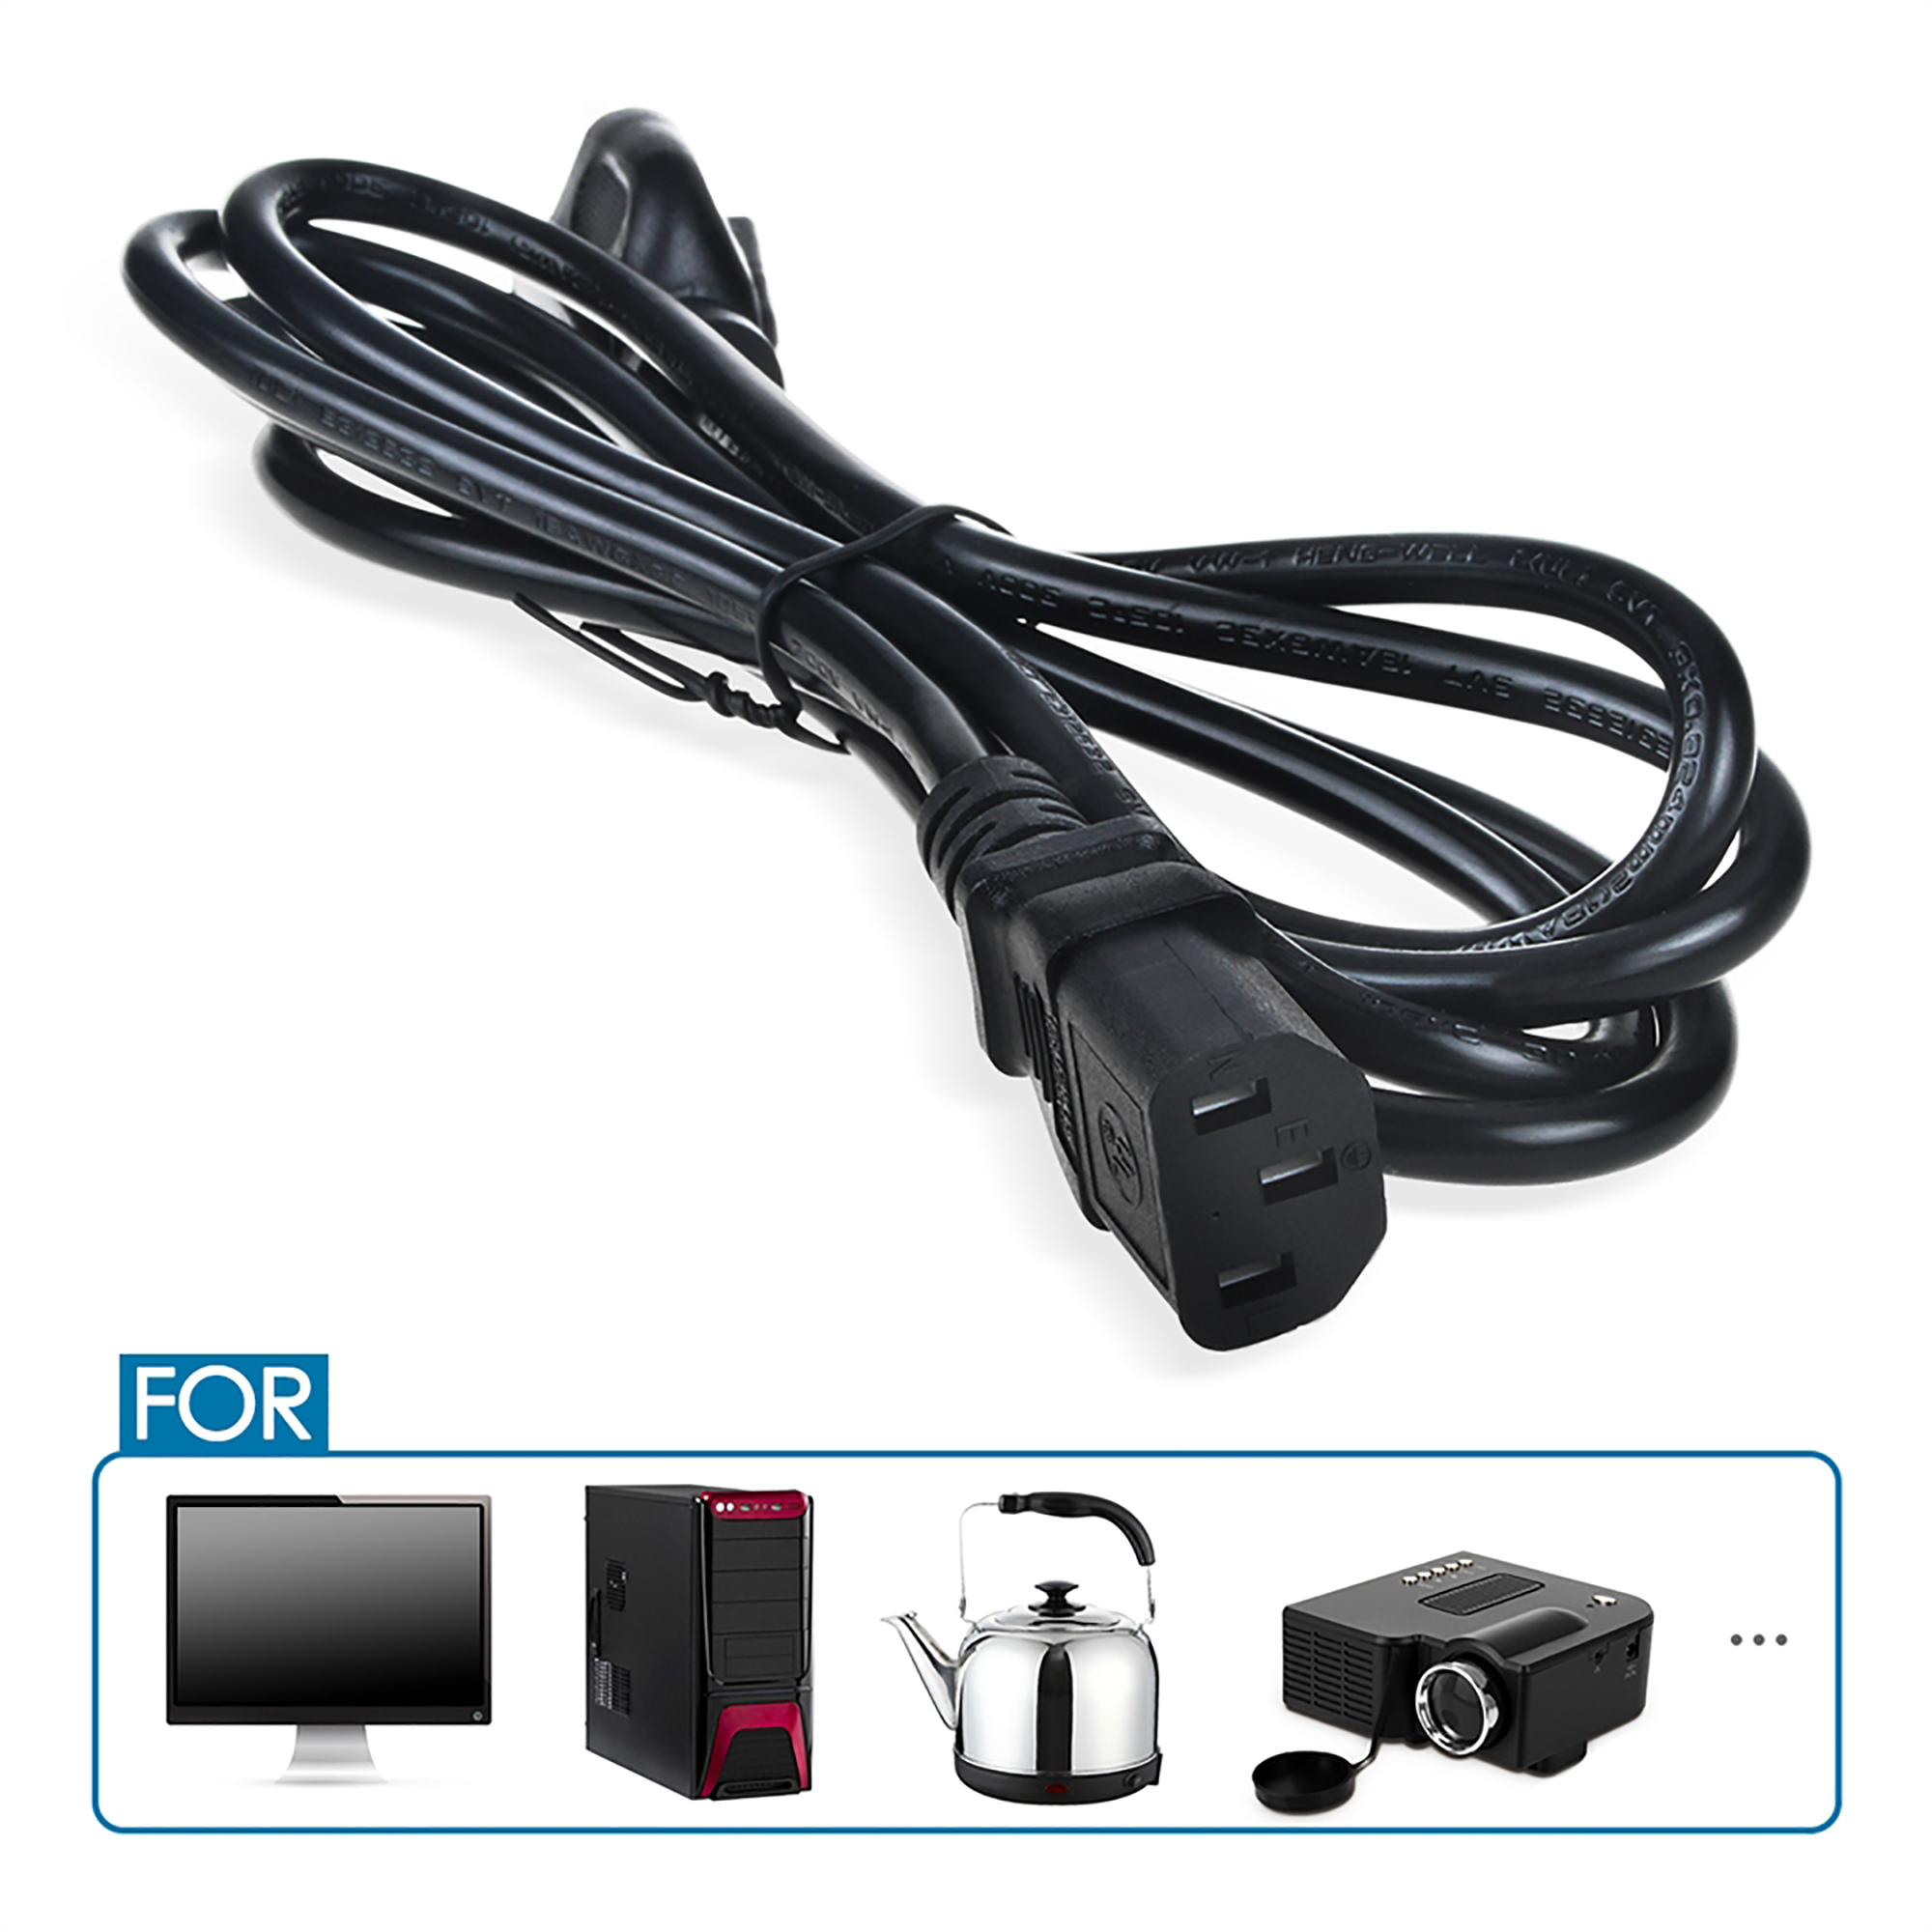 PKPOWER 6ft AC Power Cord for Pyle PT720A 1000 Watts AM/FM Tuner Hybrid Amplifier 70V - image 3 of 3